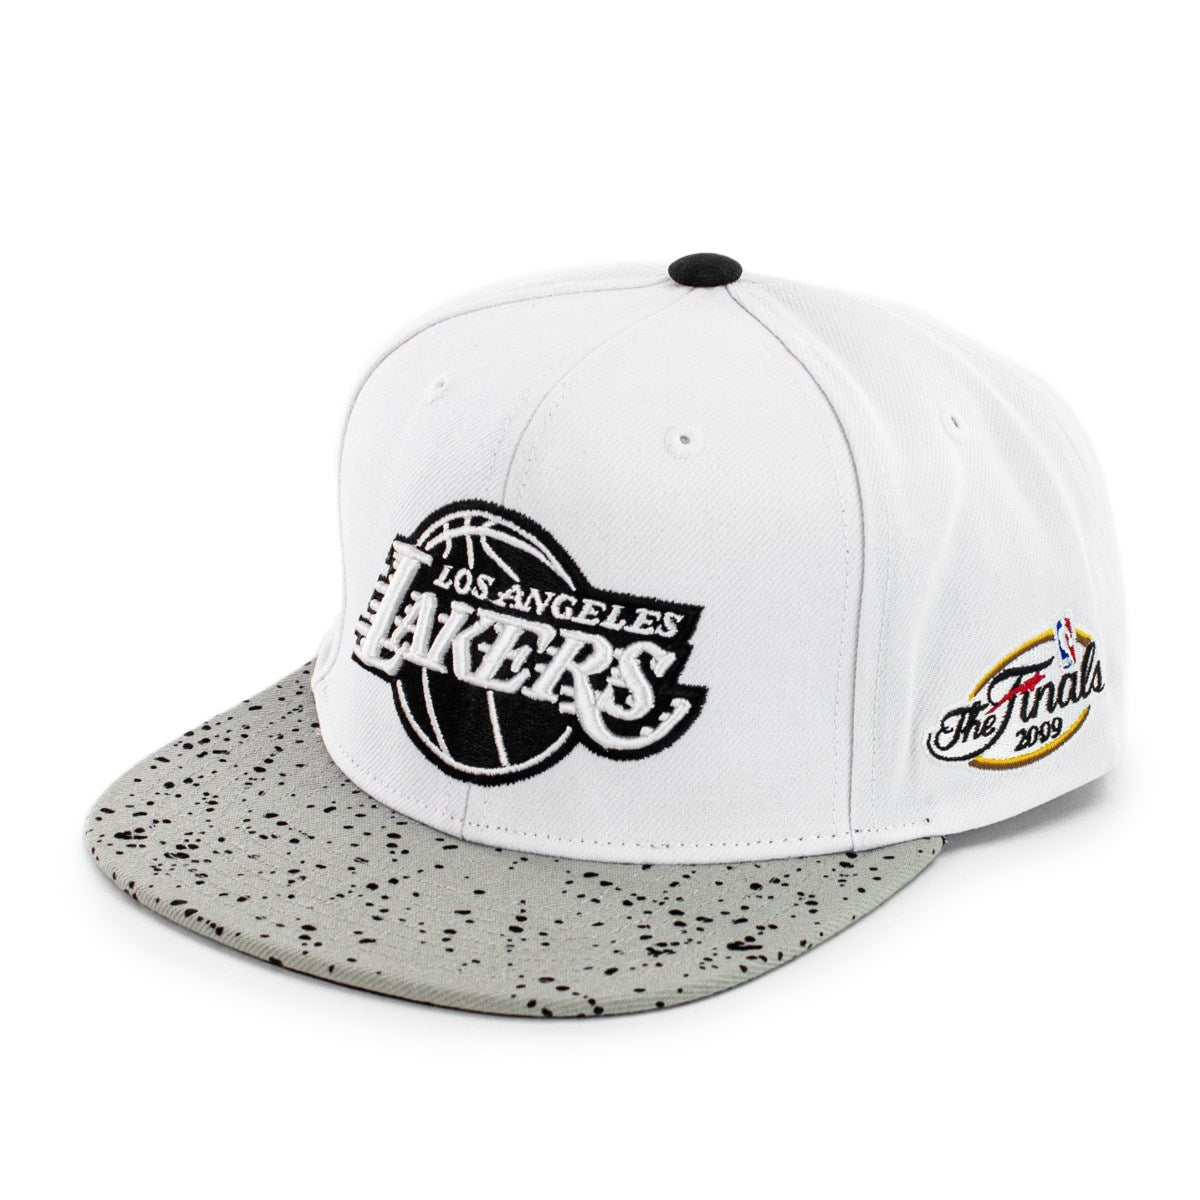 Mitchell & Ness Los Angeles Lakers NBA Cement Top Snapback Cap 6HSSMM20249-LALWHSV-